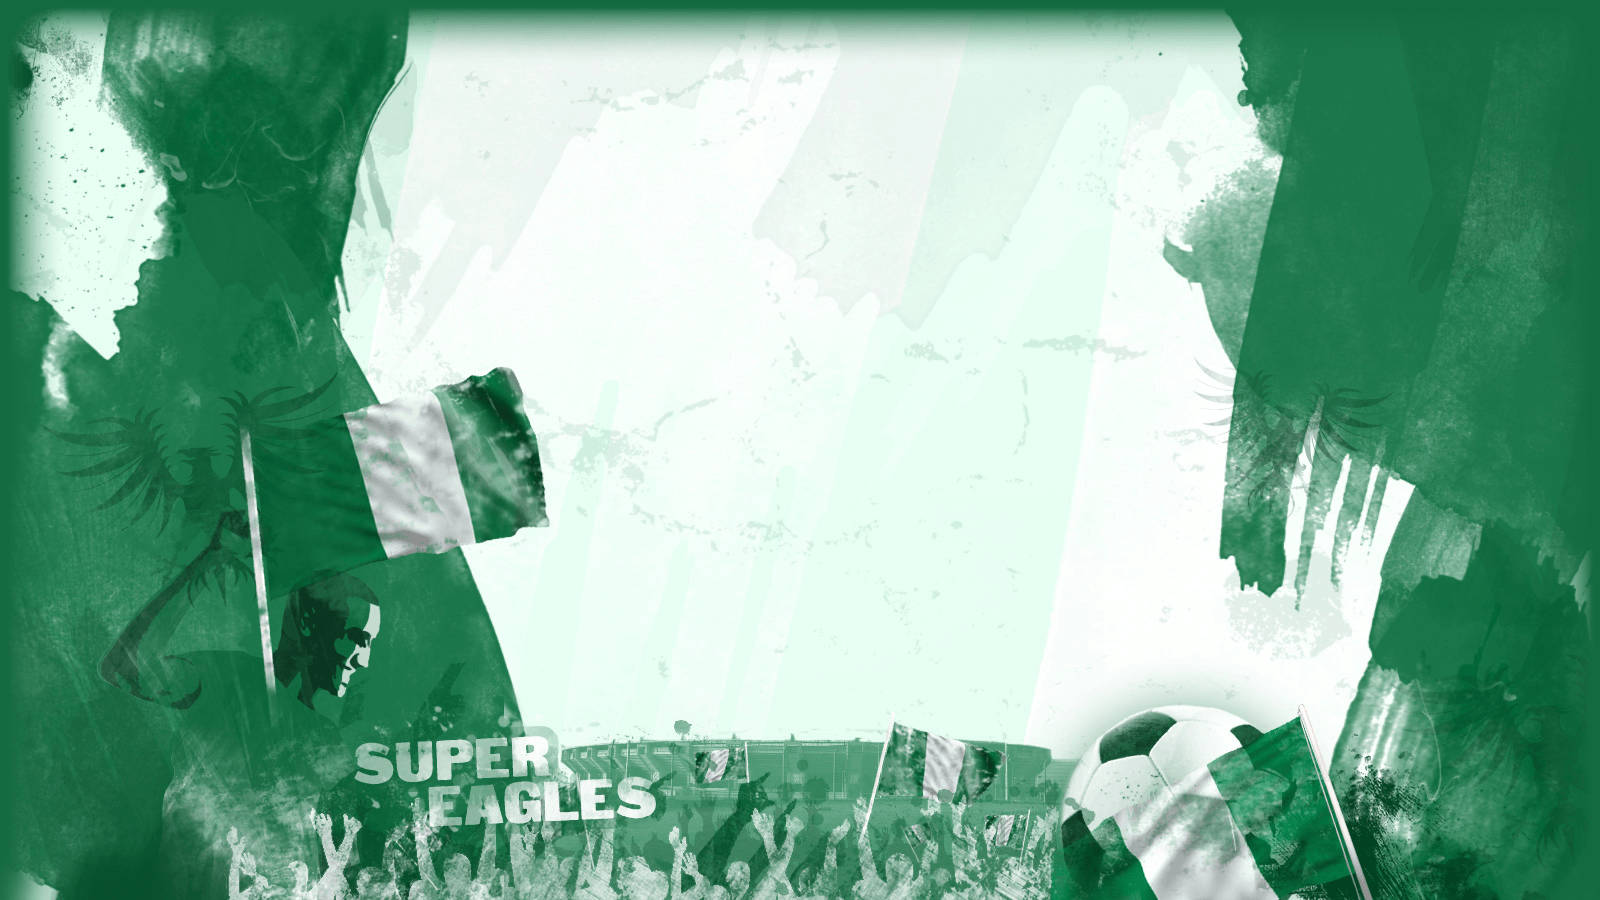 Nigeria's Proud Super Eagles With National Flag Wallpaper